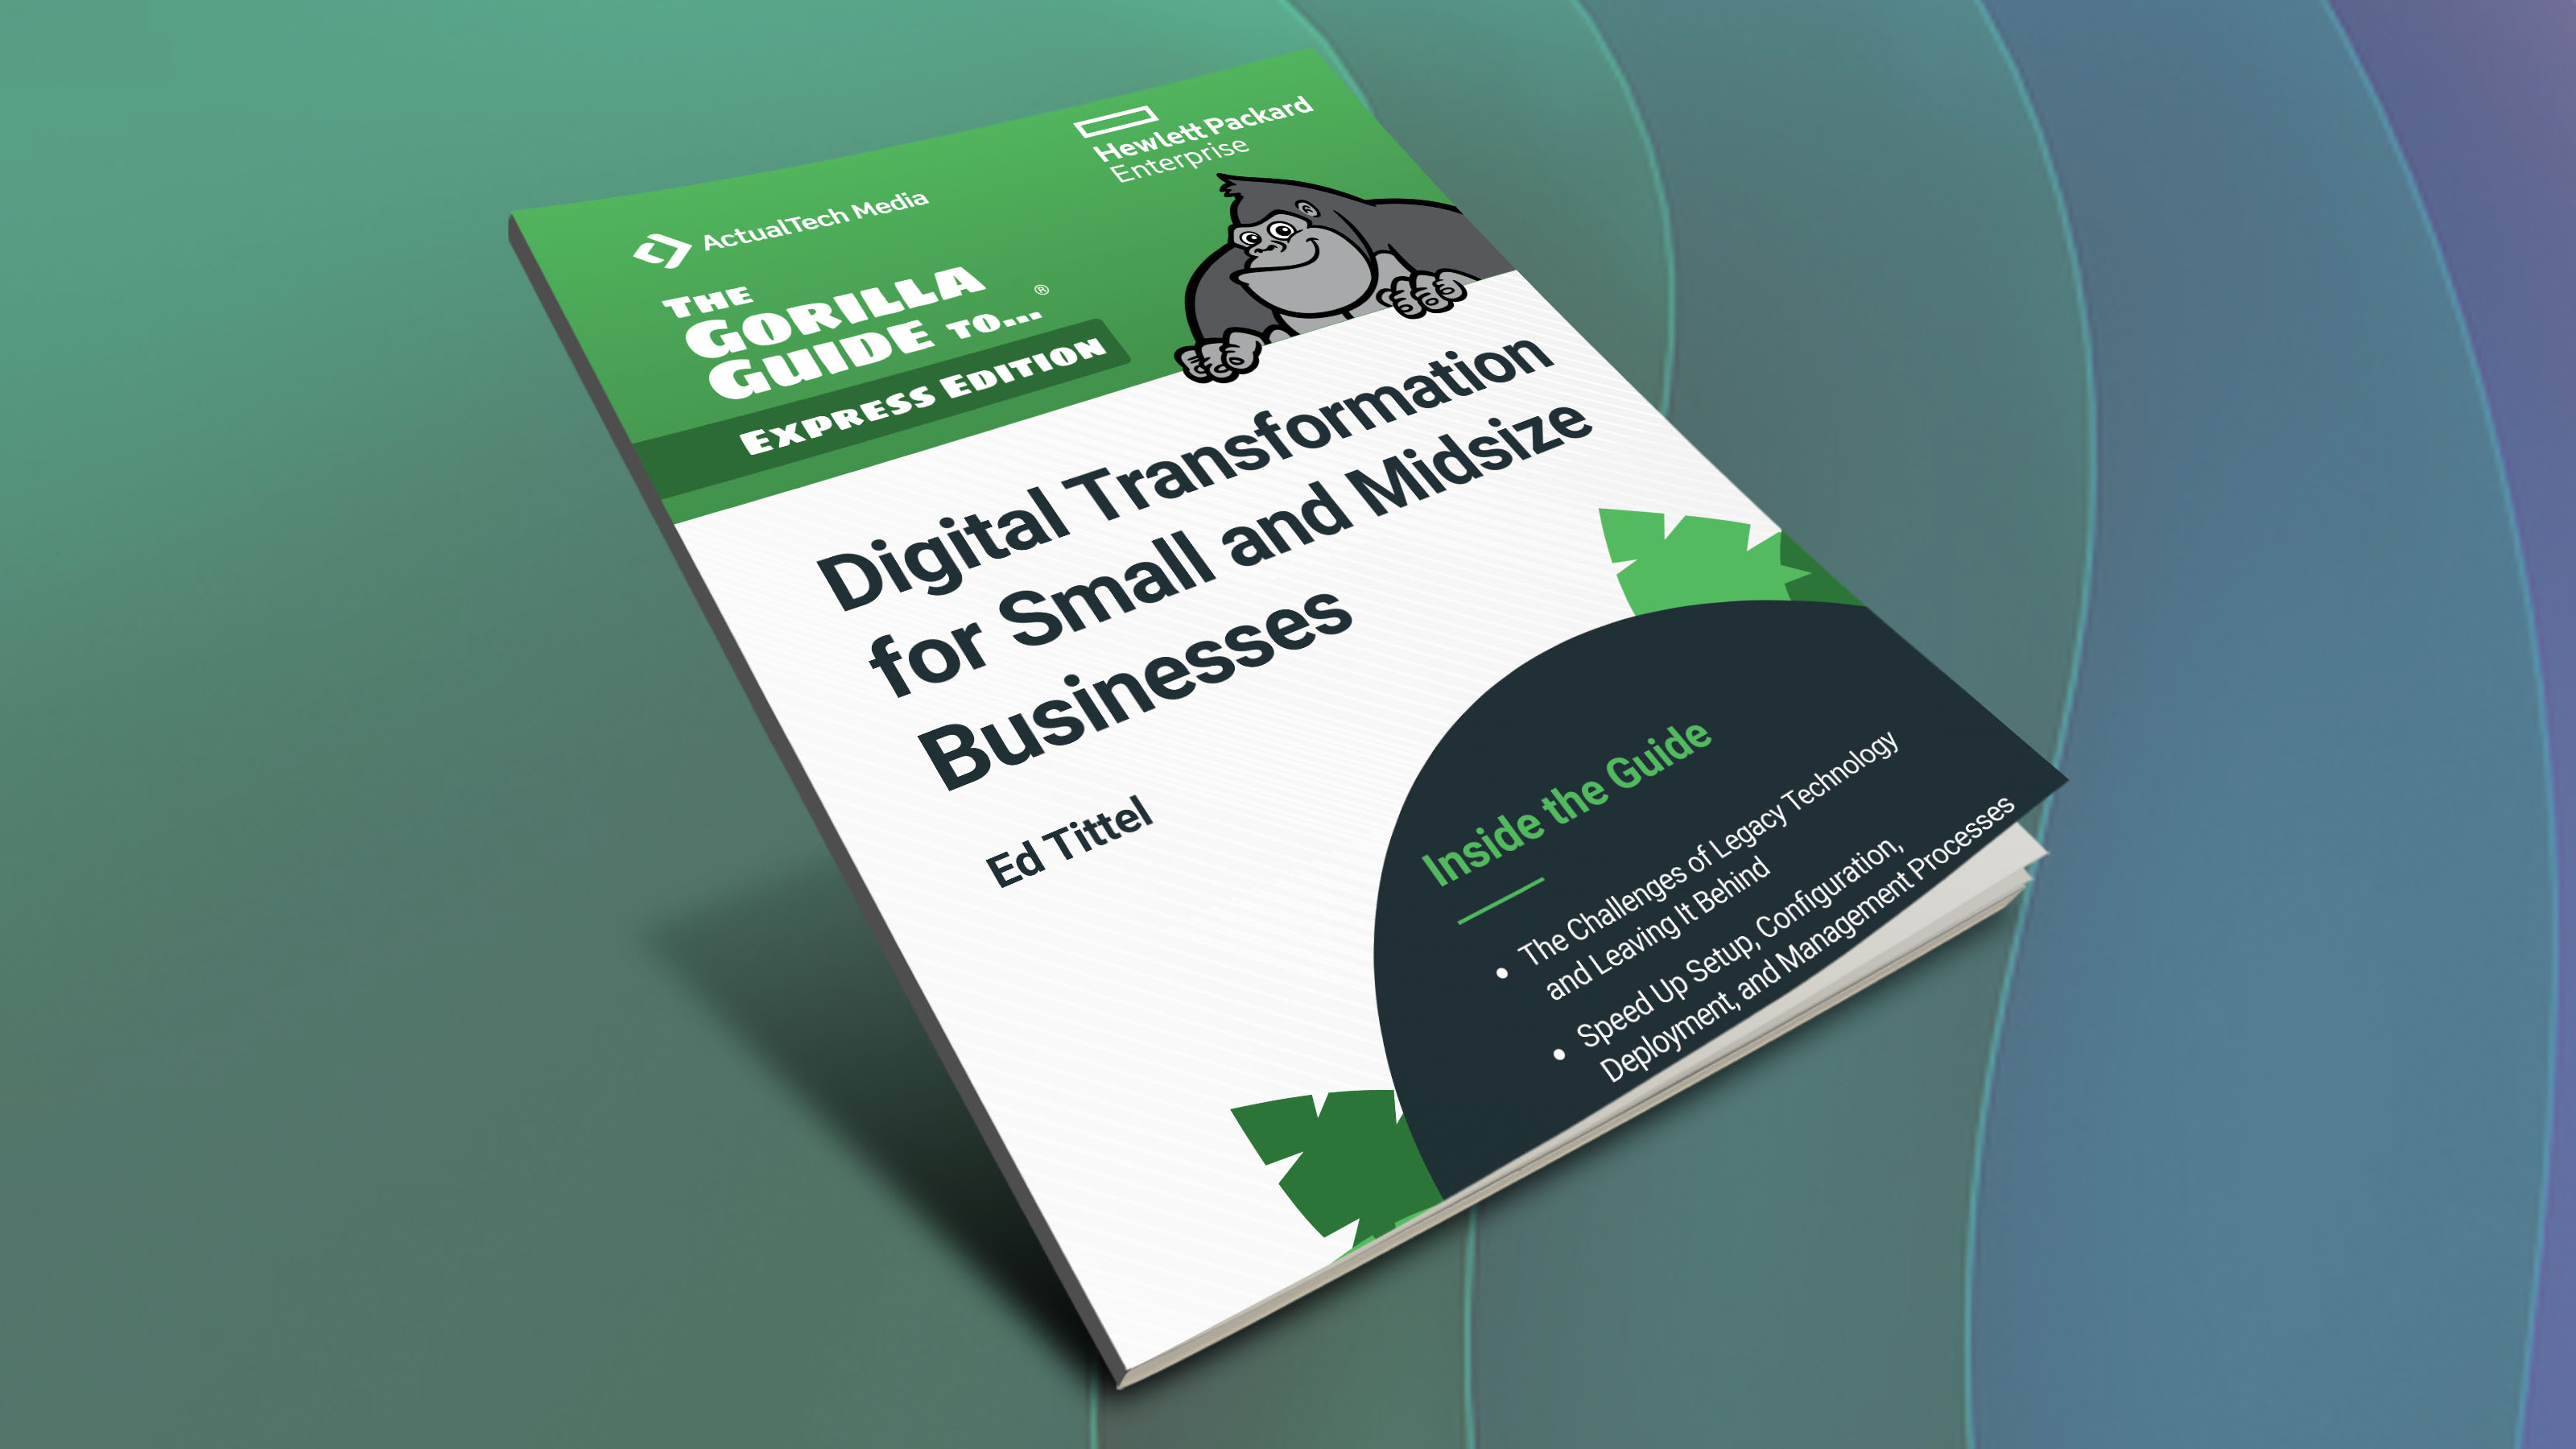 Digital Transformation for Small and Midsize Businesses image